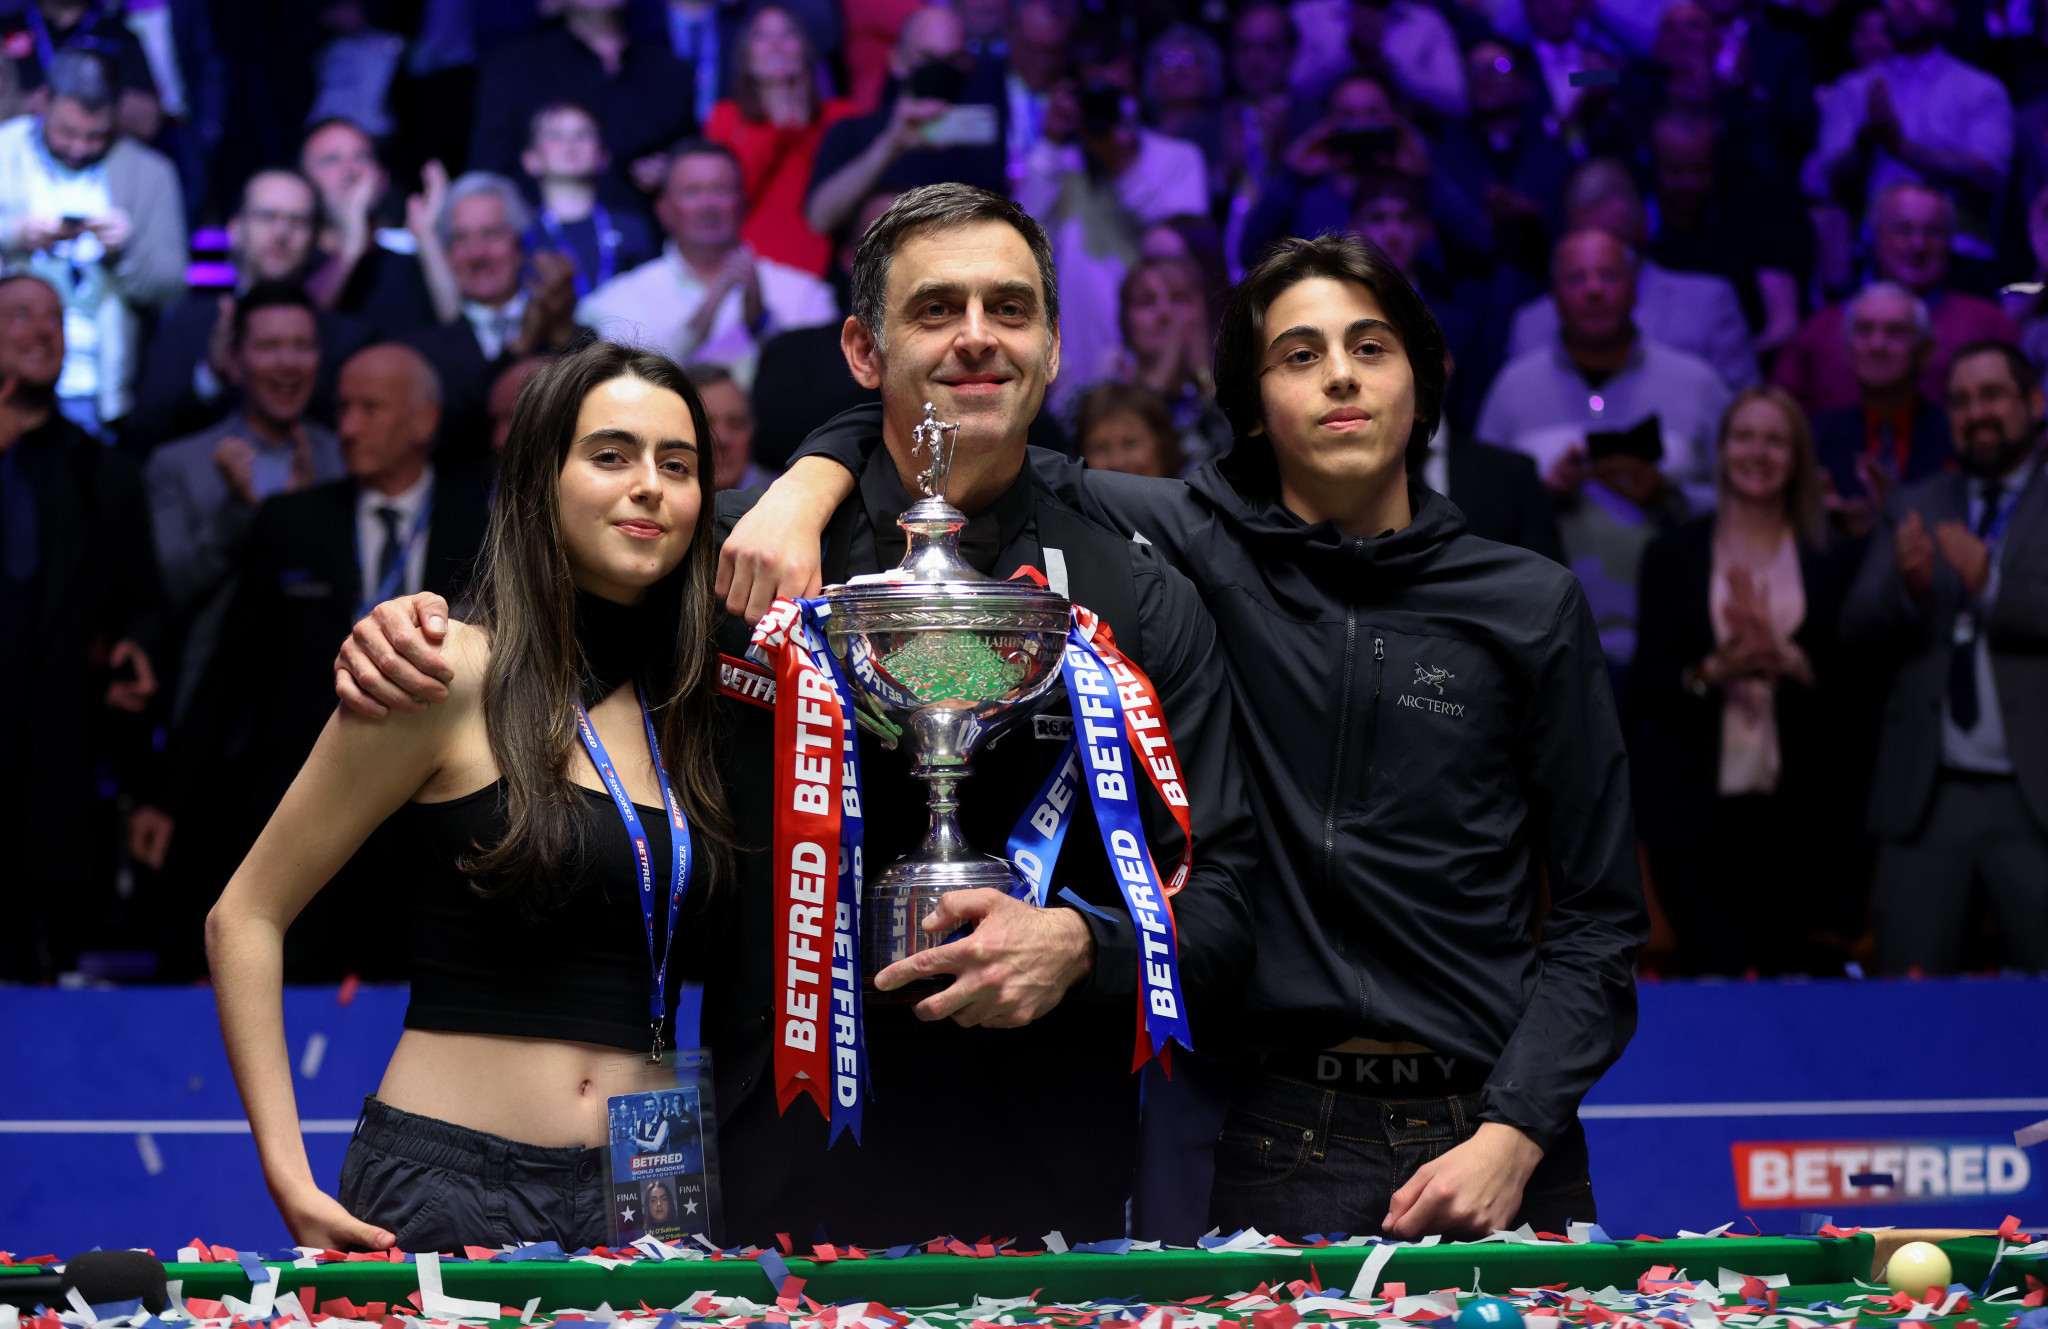 Current men's world champion Ronnie O'Sullivan is among the male players set to participate in the World Mixed Doubles snooker tournament ©Getty Images